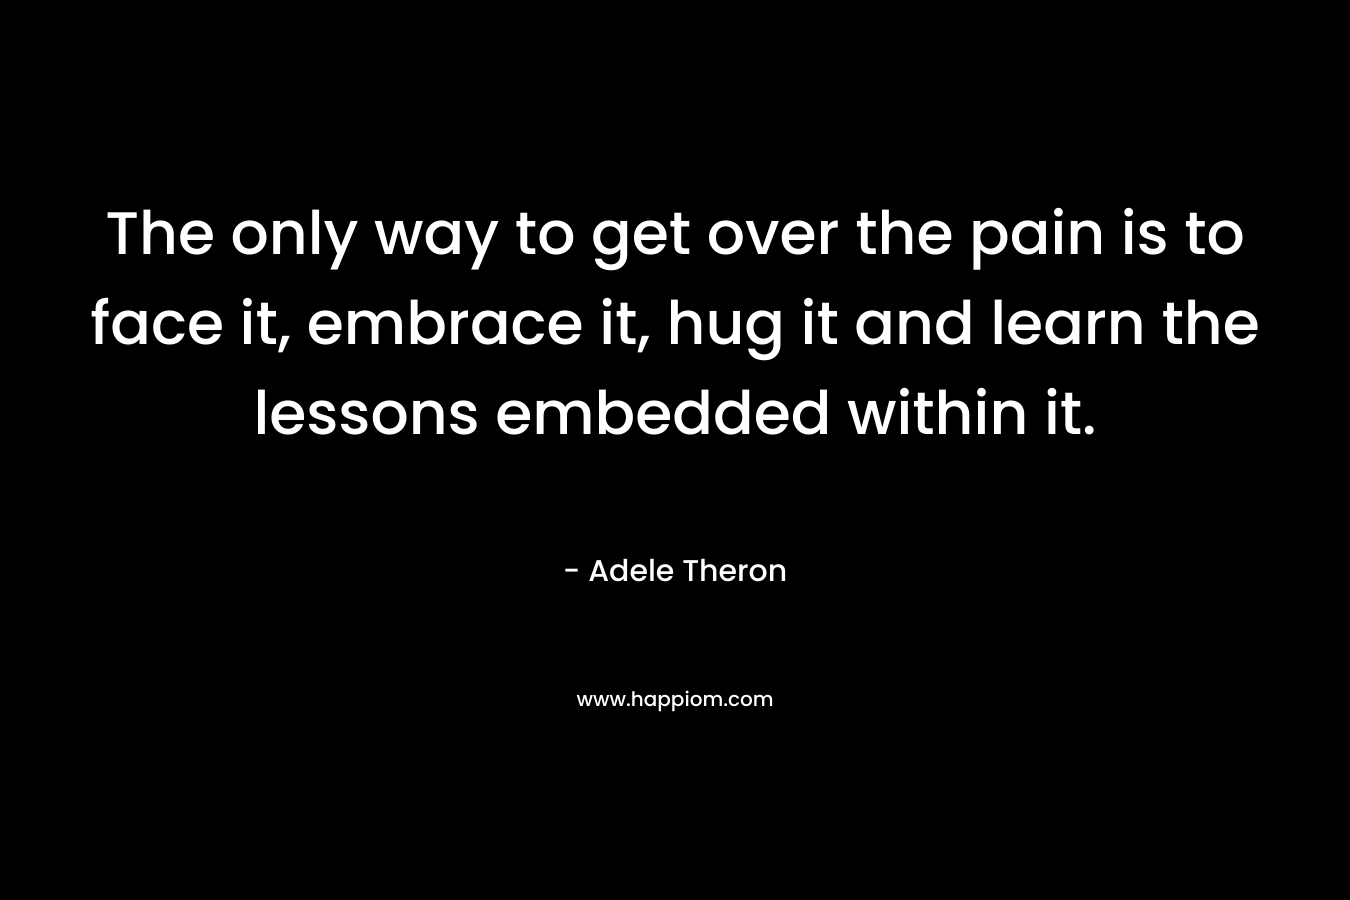 The only way to get over the pain is to face it, embrace it, hug it and learn the lessons embedded within it. – Adele Theron